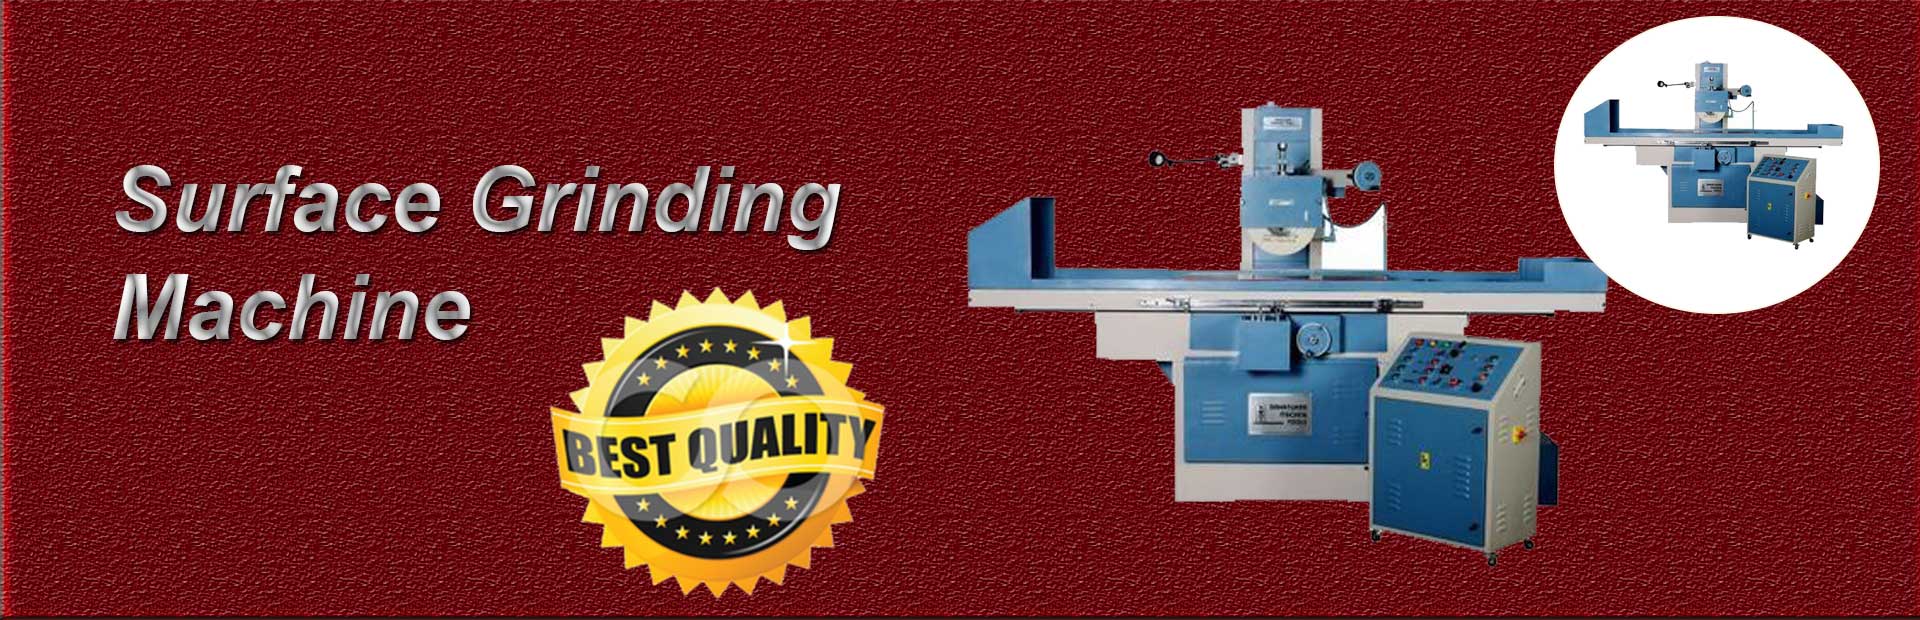 Surface Grinding Machine Exporter, Supplier in India